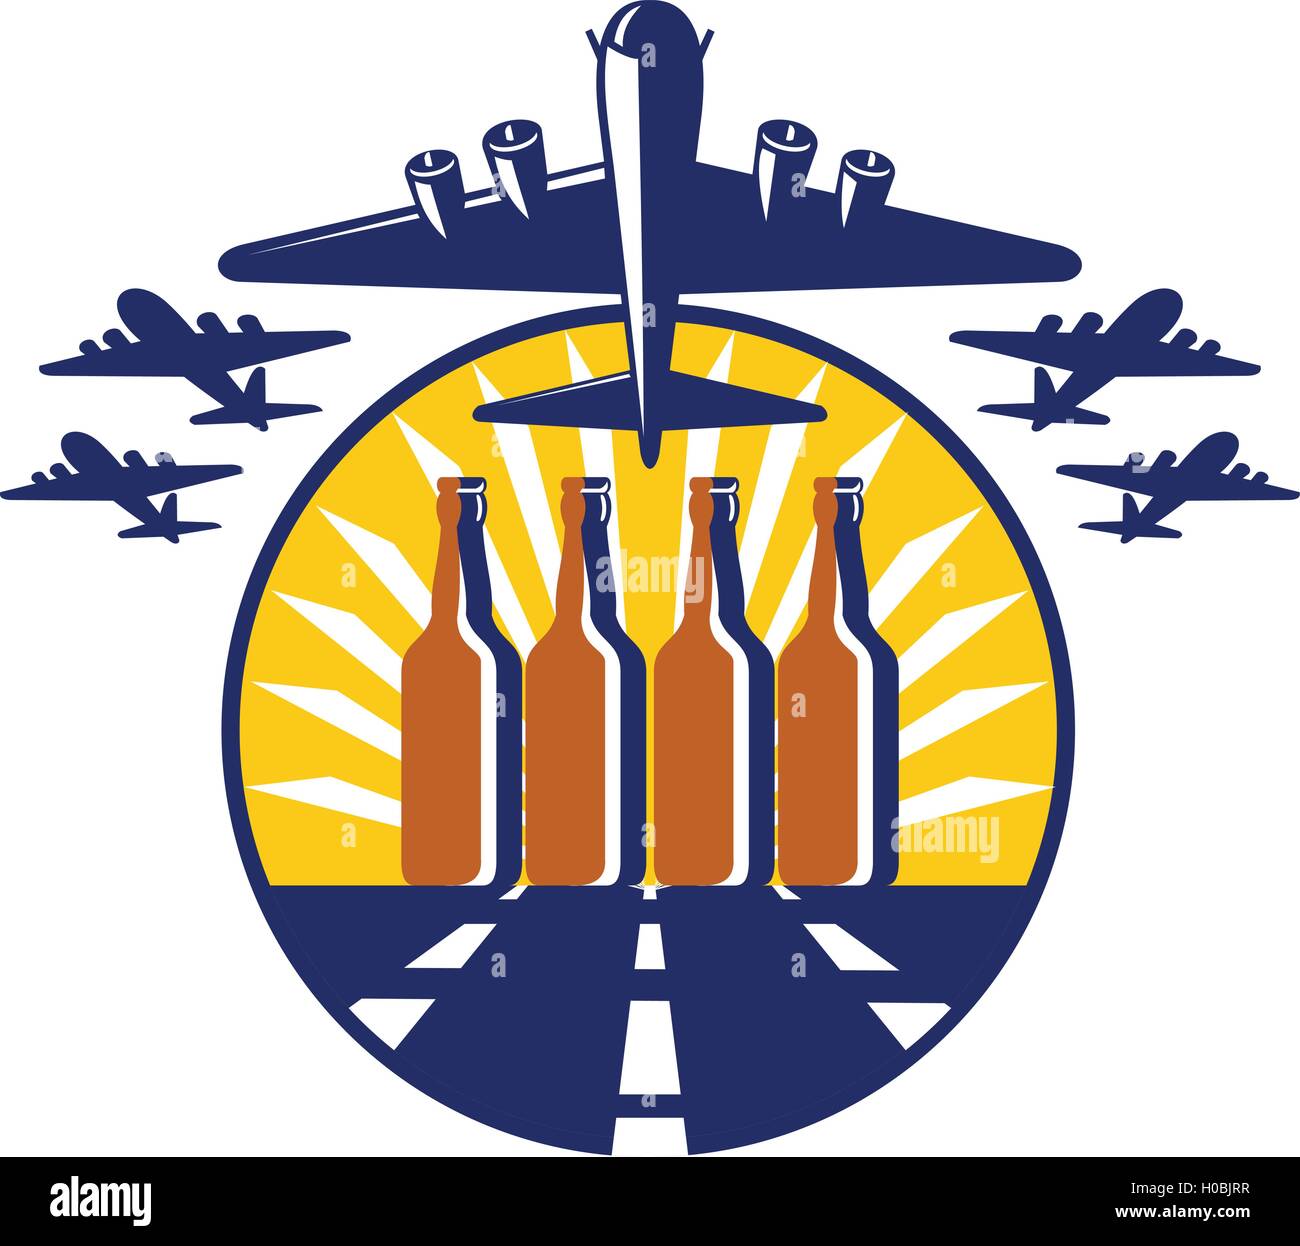 Illustration of a B-17 Flying Fortress, a World War two American four-engine heavy bomber taking off and in full flight with beer bottles in the runway and sunburst in the background set inside circle done in retro style. Stock Vector